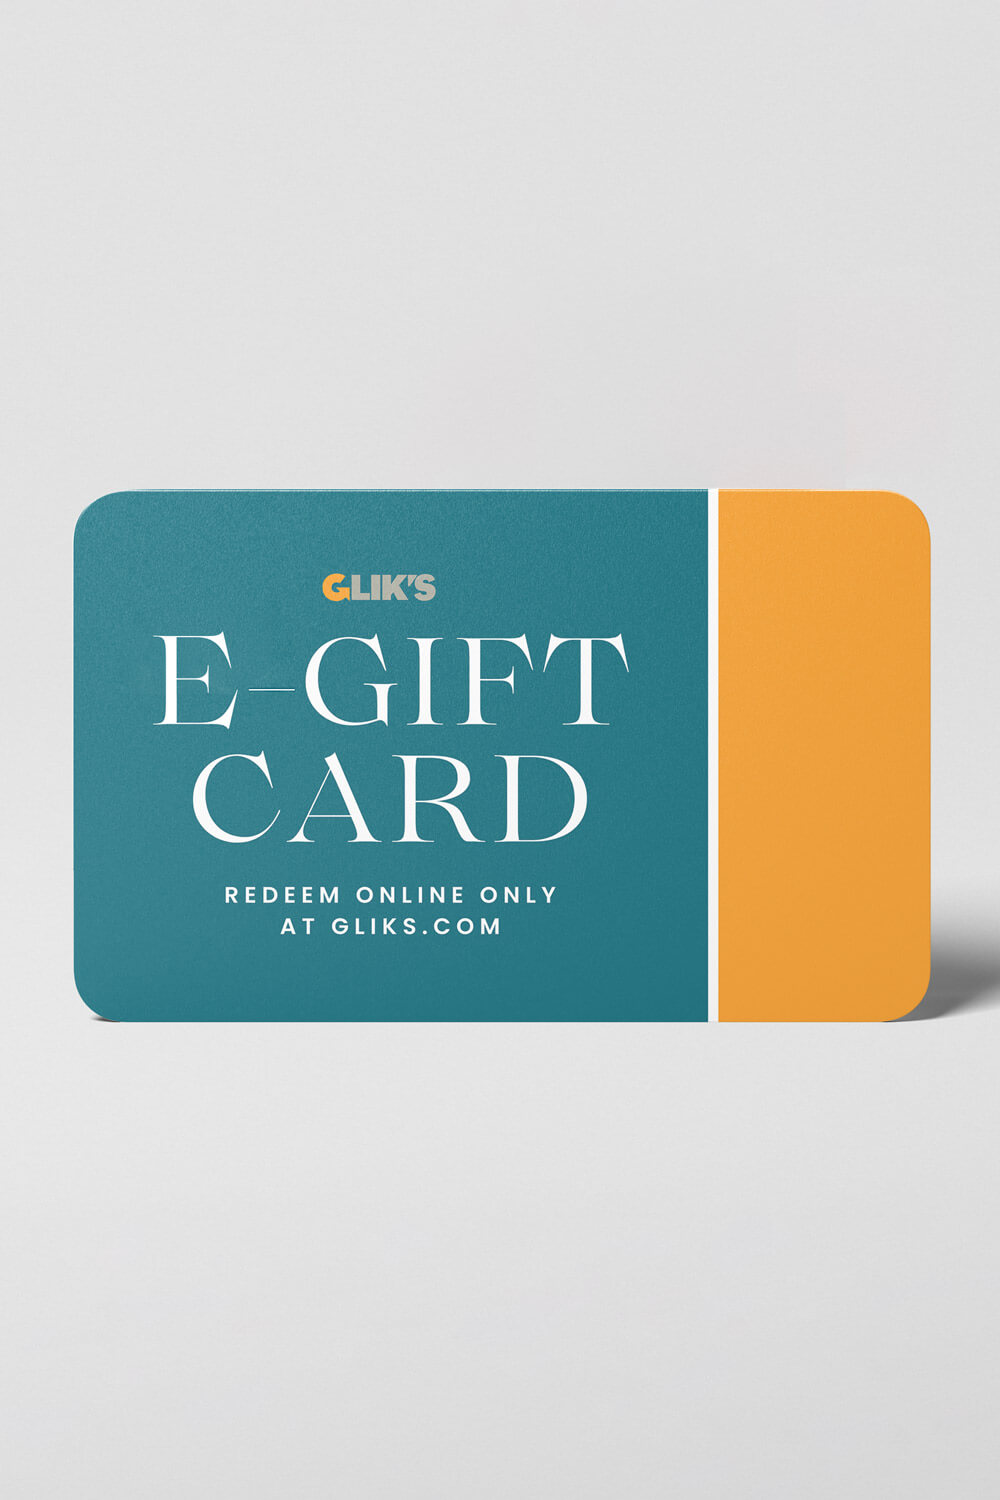 E-Gift Card - Instant or Scheduled Delivery